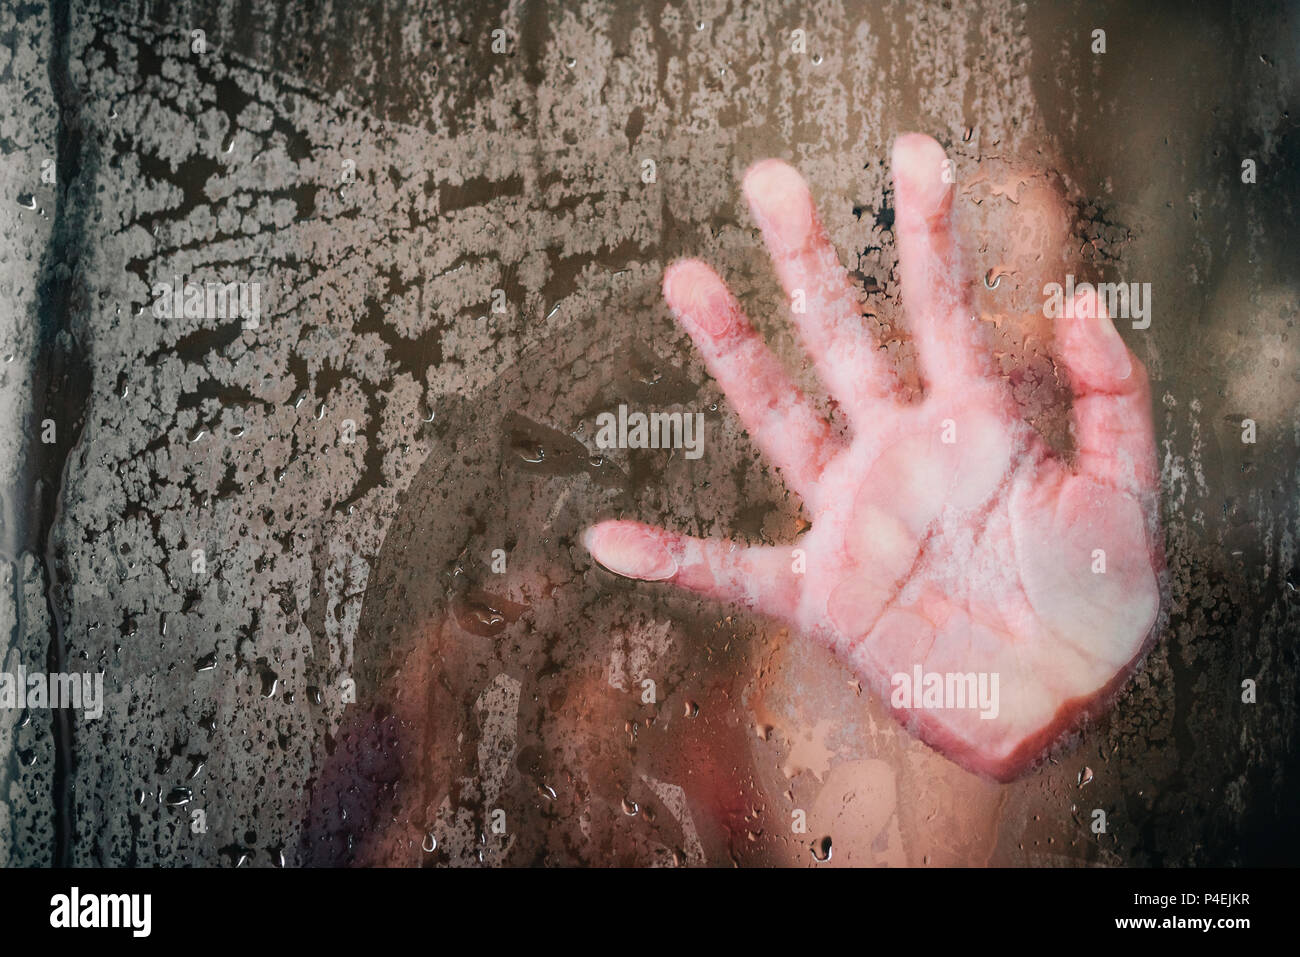 Girls hand wiping steam from the shower glass Stock Photo